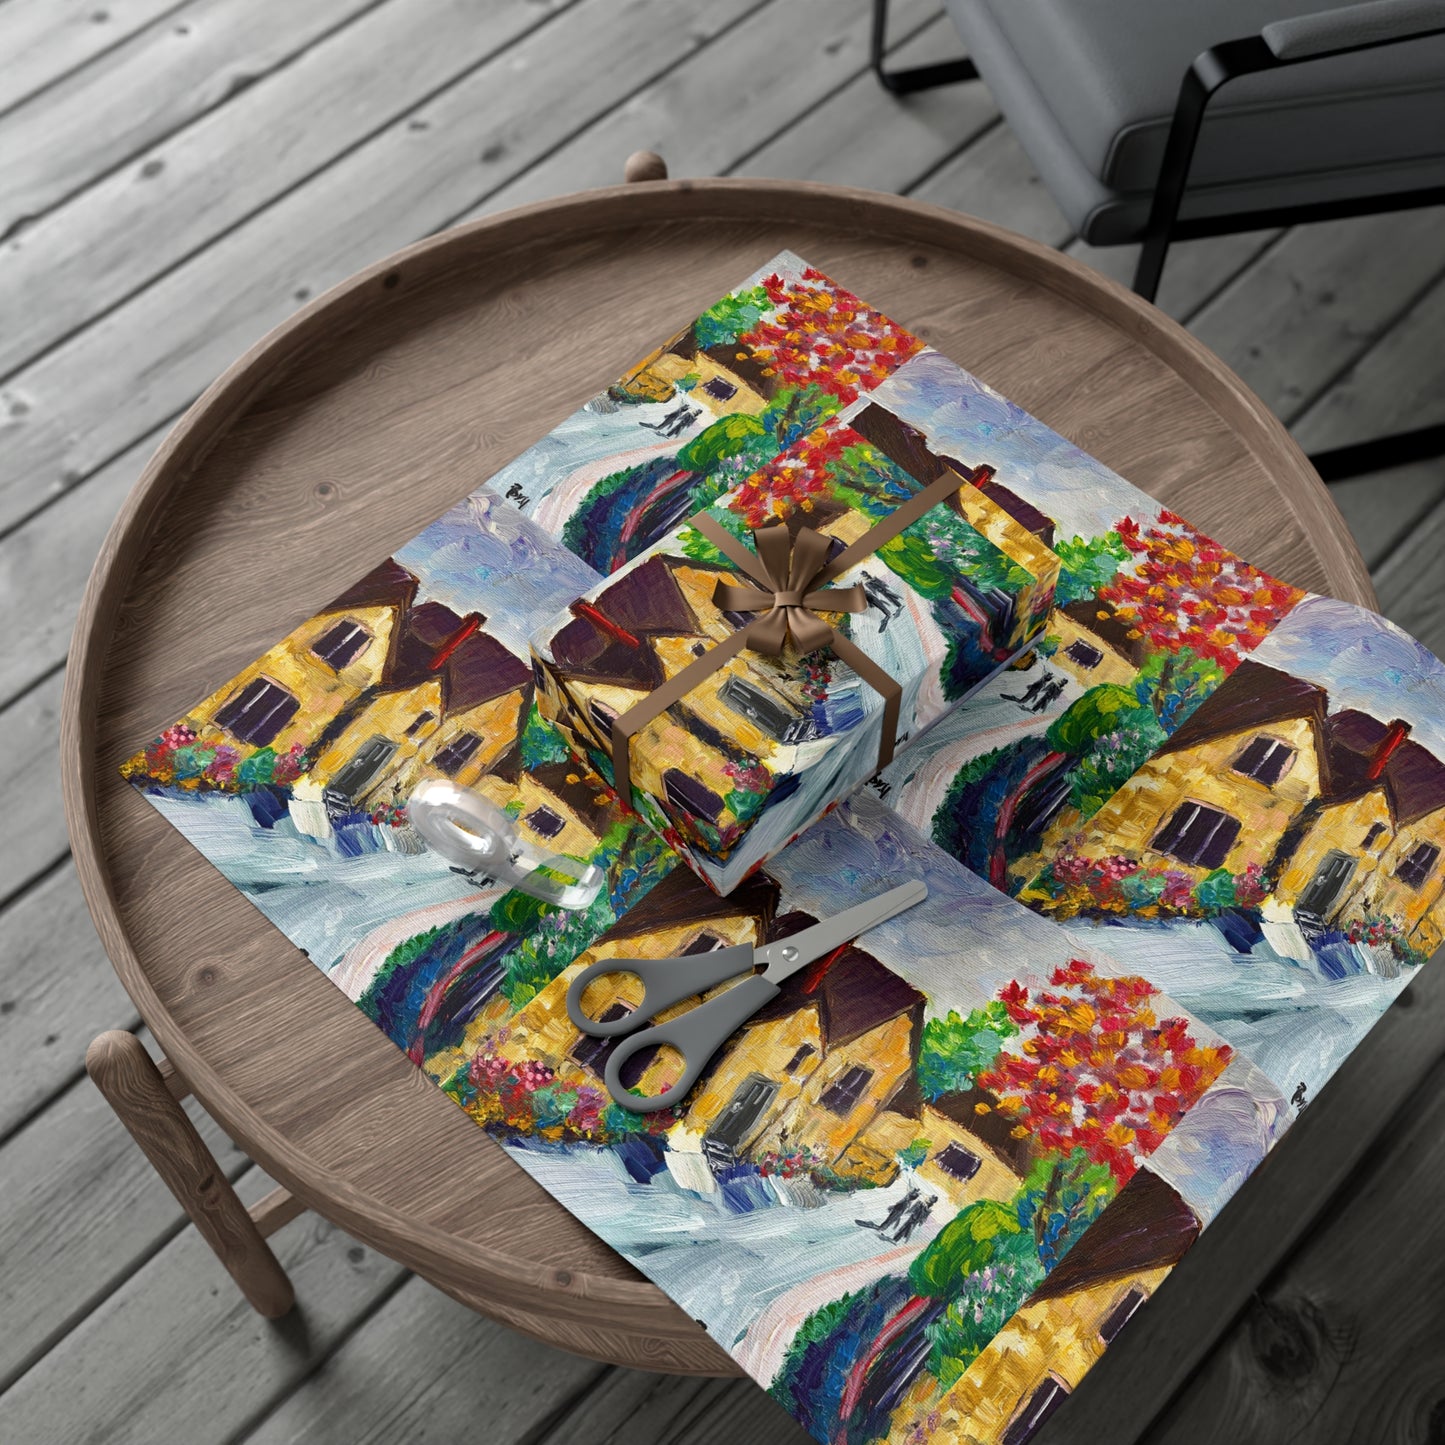 Charming Medieval Village Cottages Cotswolds Gift Wrapping Paper -Ships from America